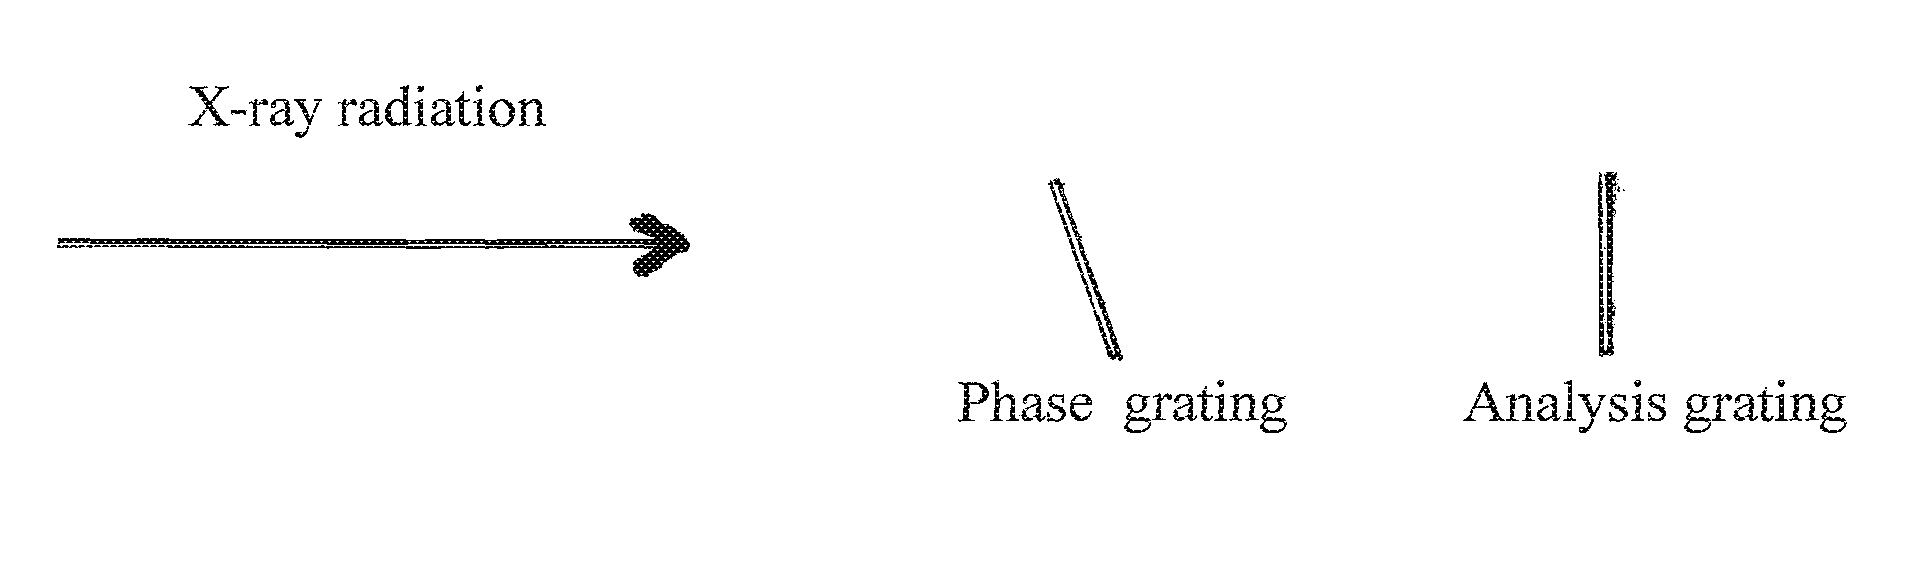 Inclined phase grating structures